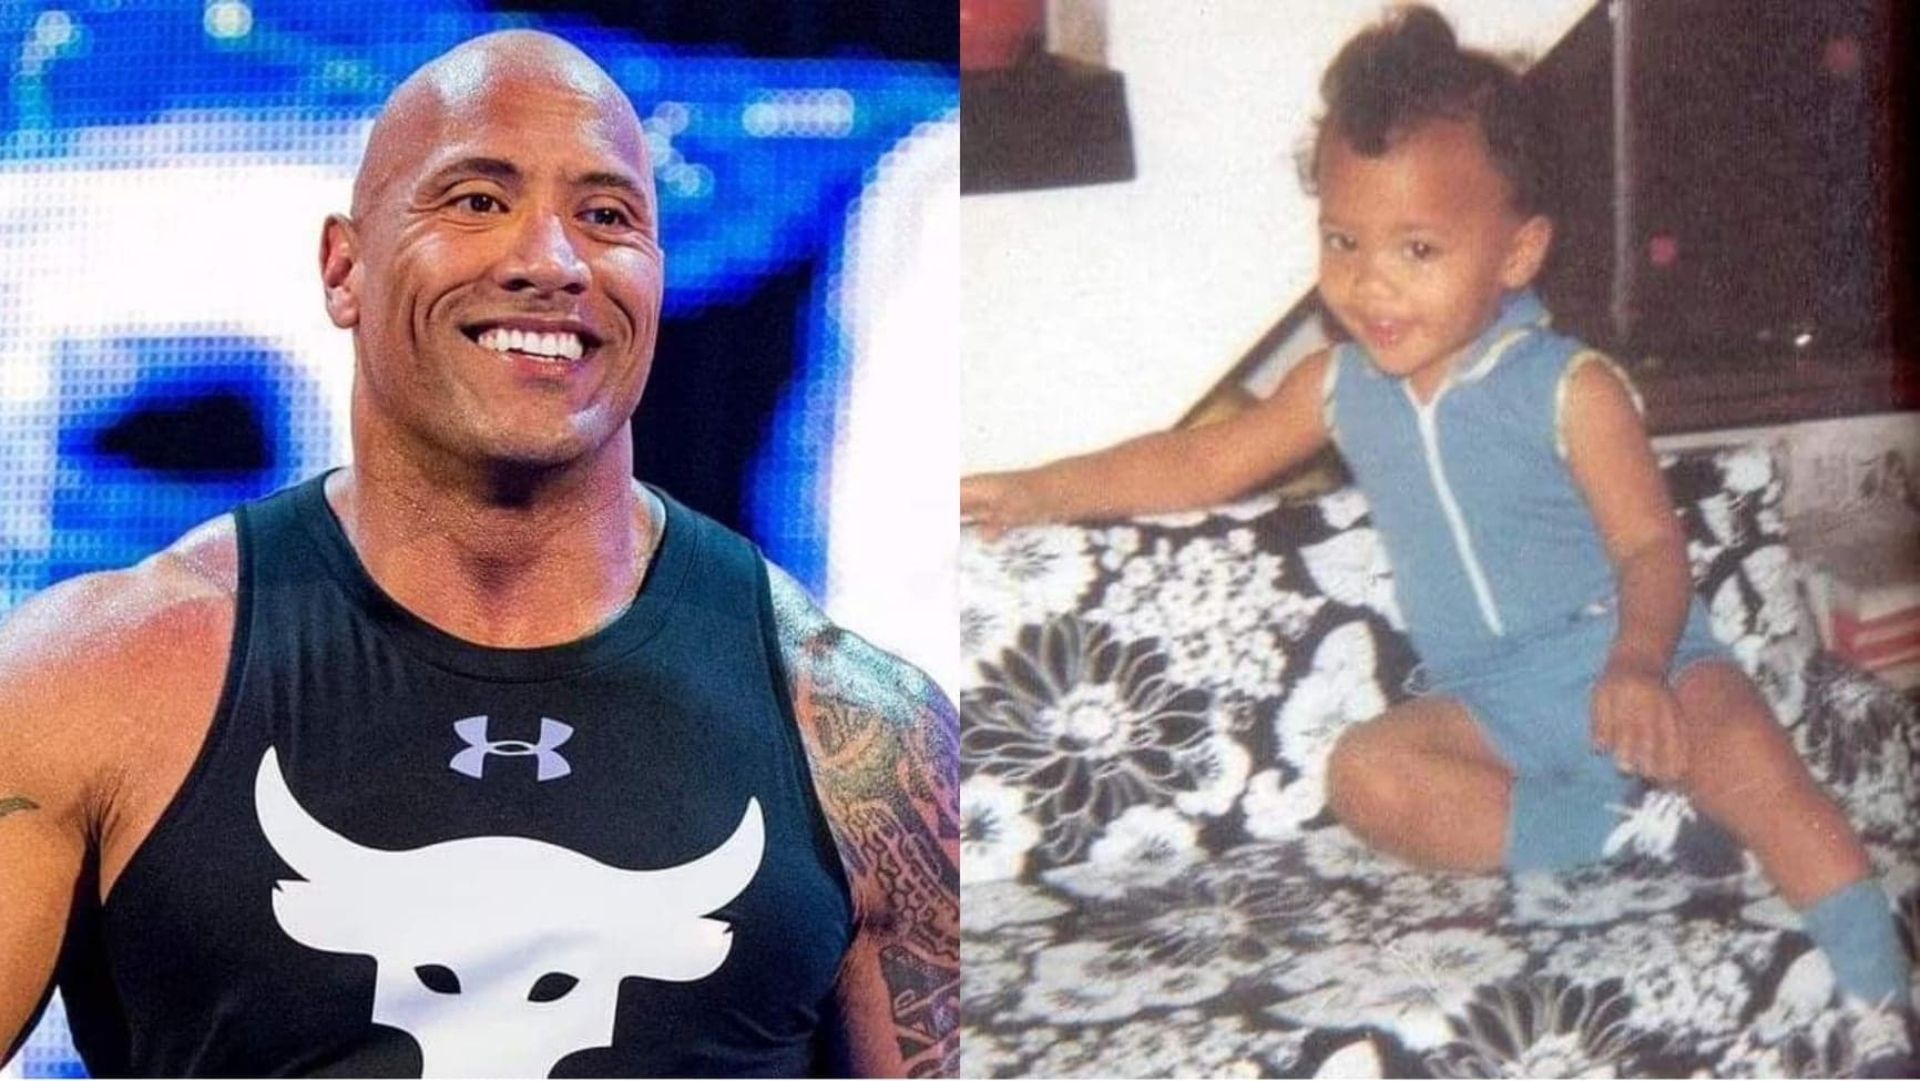 The Rock during his childhood days